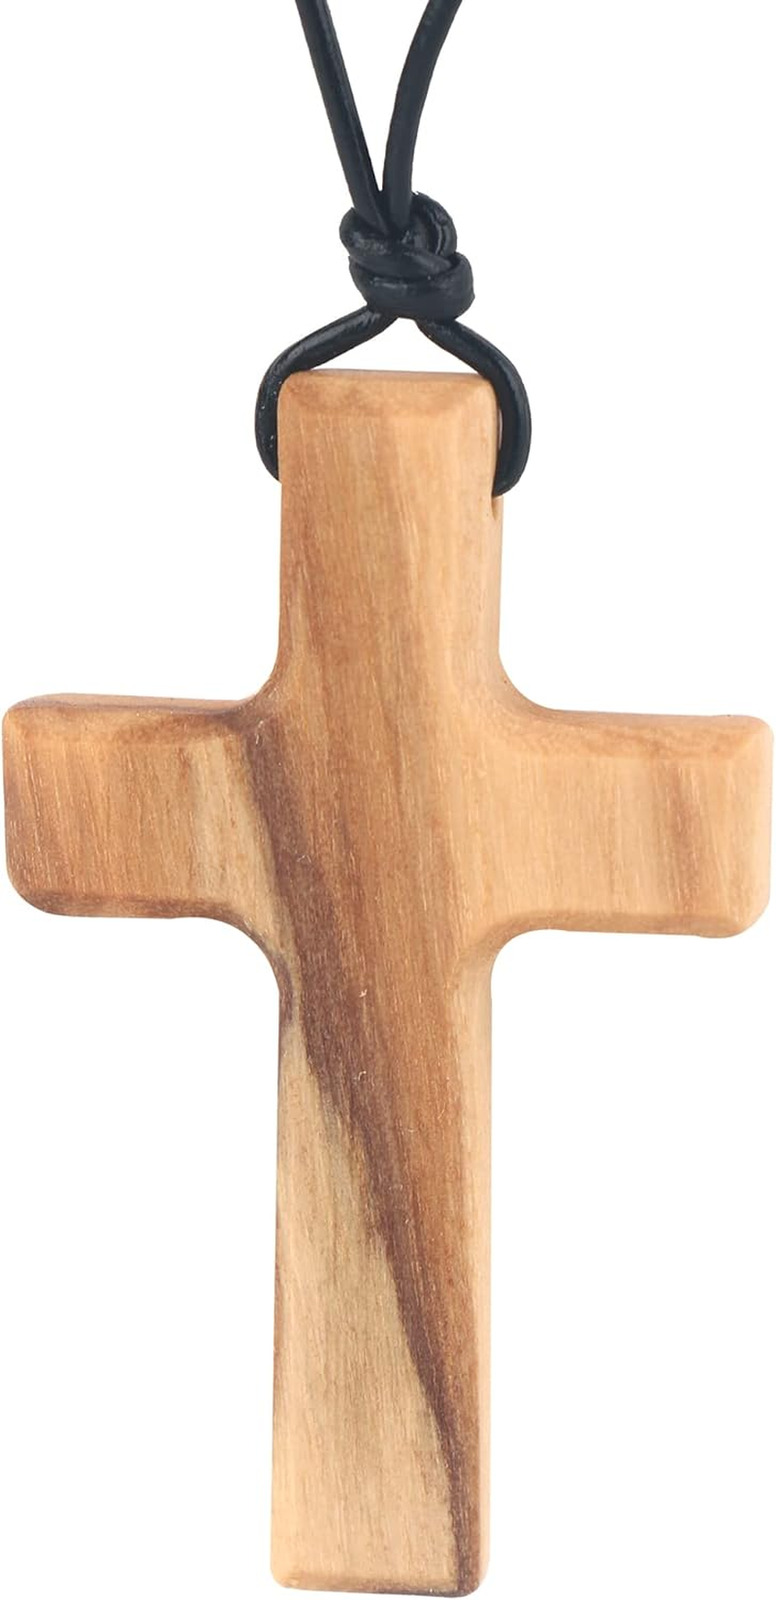 Natural Wood Cross Pendant Necklace Hand Carved Wooden Cross Necklace for Men